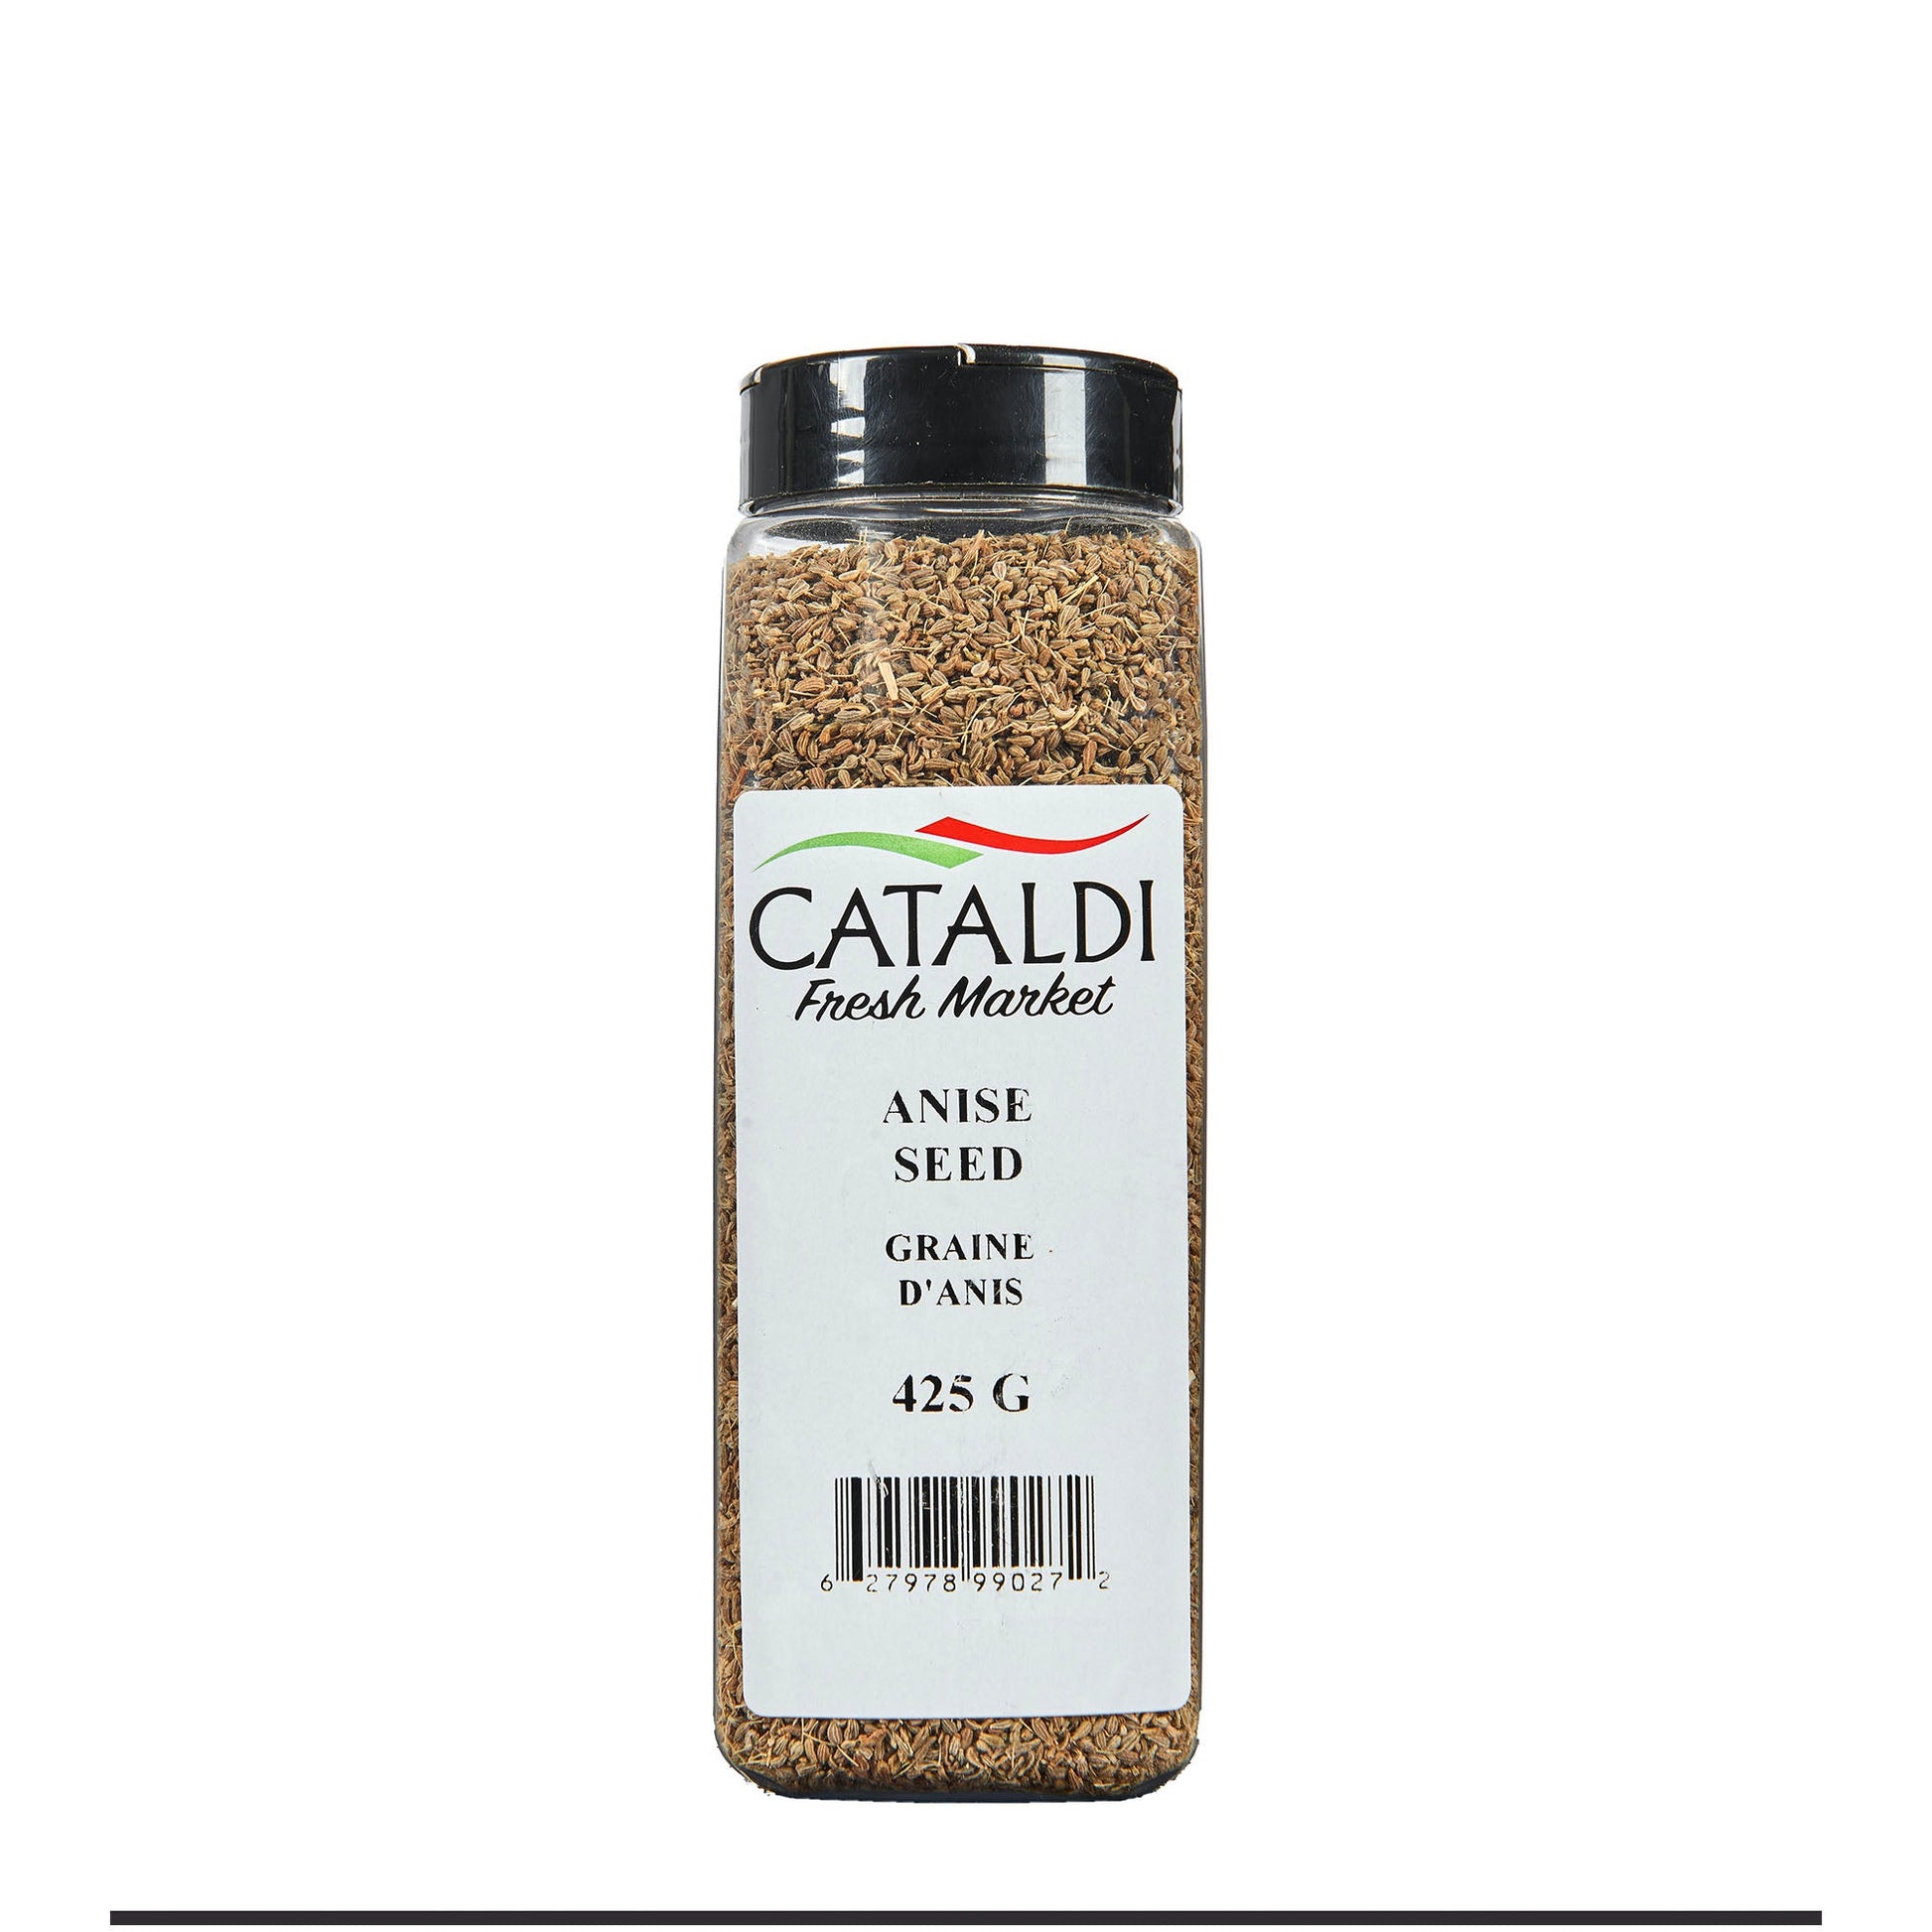 Cataldi Anise Seed Whole 425G